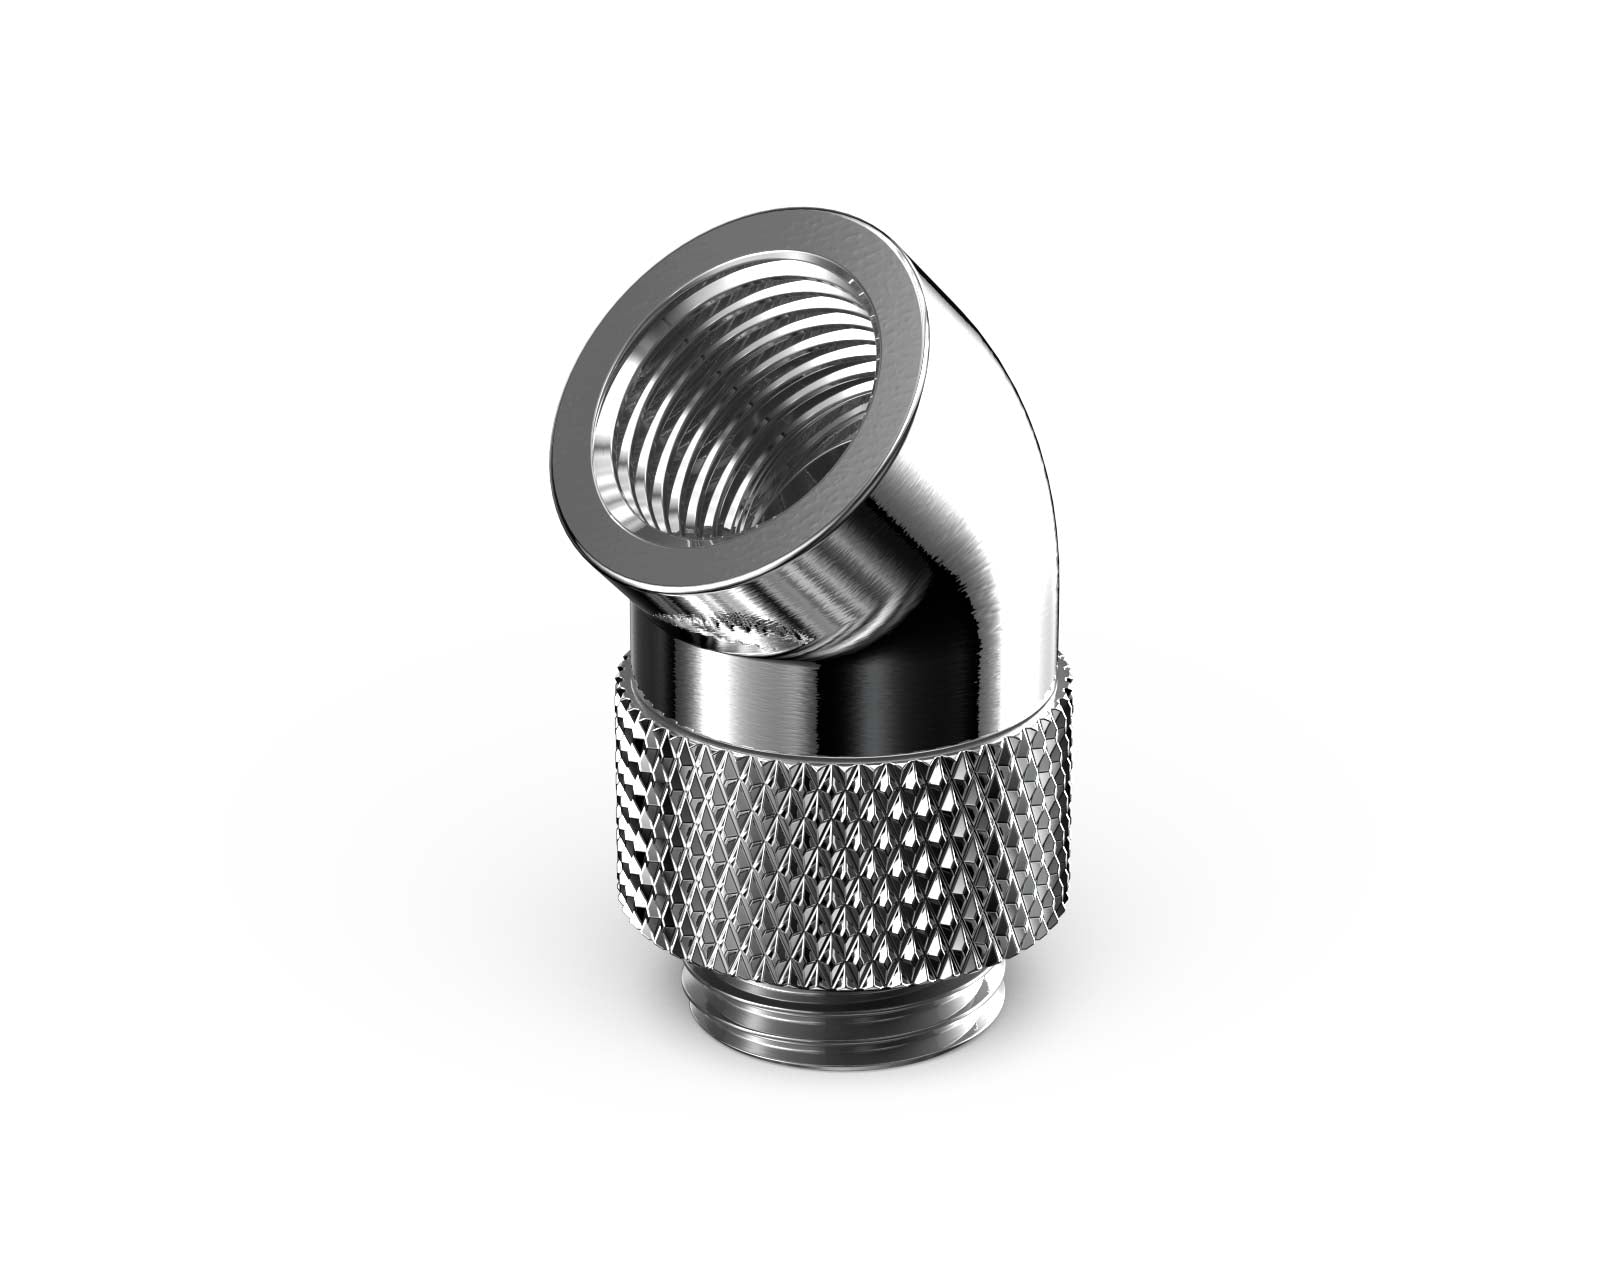 PrimoChill Male to Female G 1/4in. 45 Degree SX Rotary Elbow Fitting - PrimoChill - KEEPING IT COOL Silver Nickel